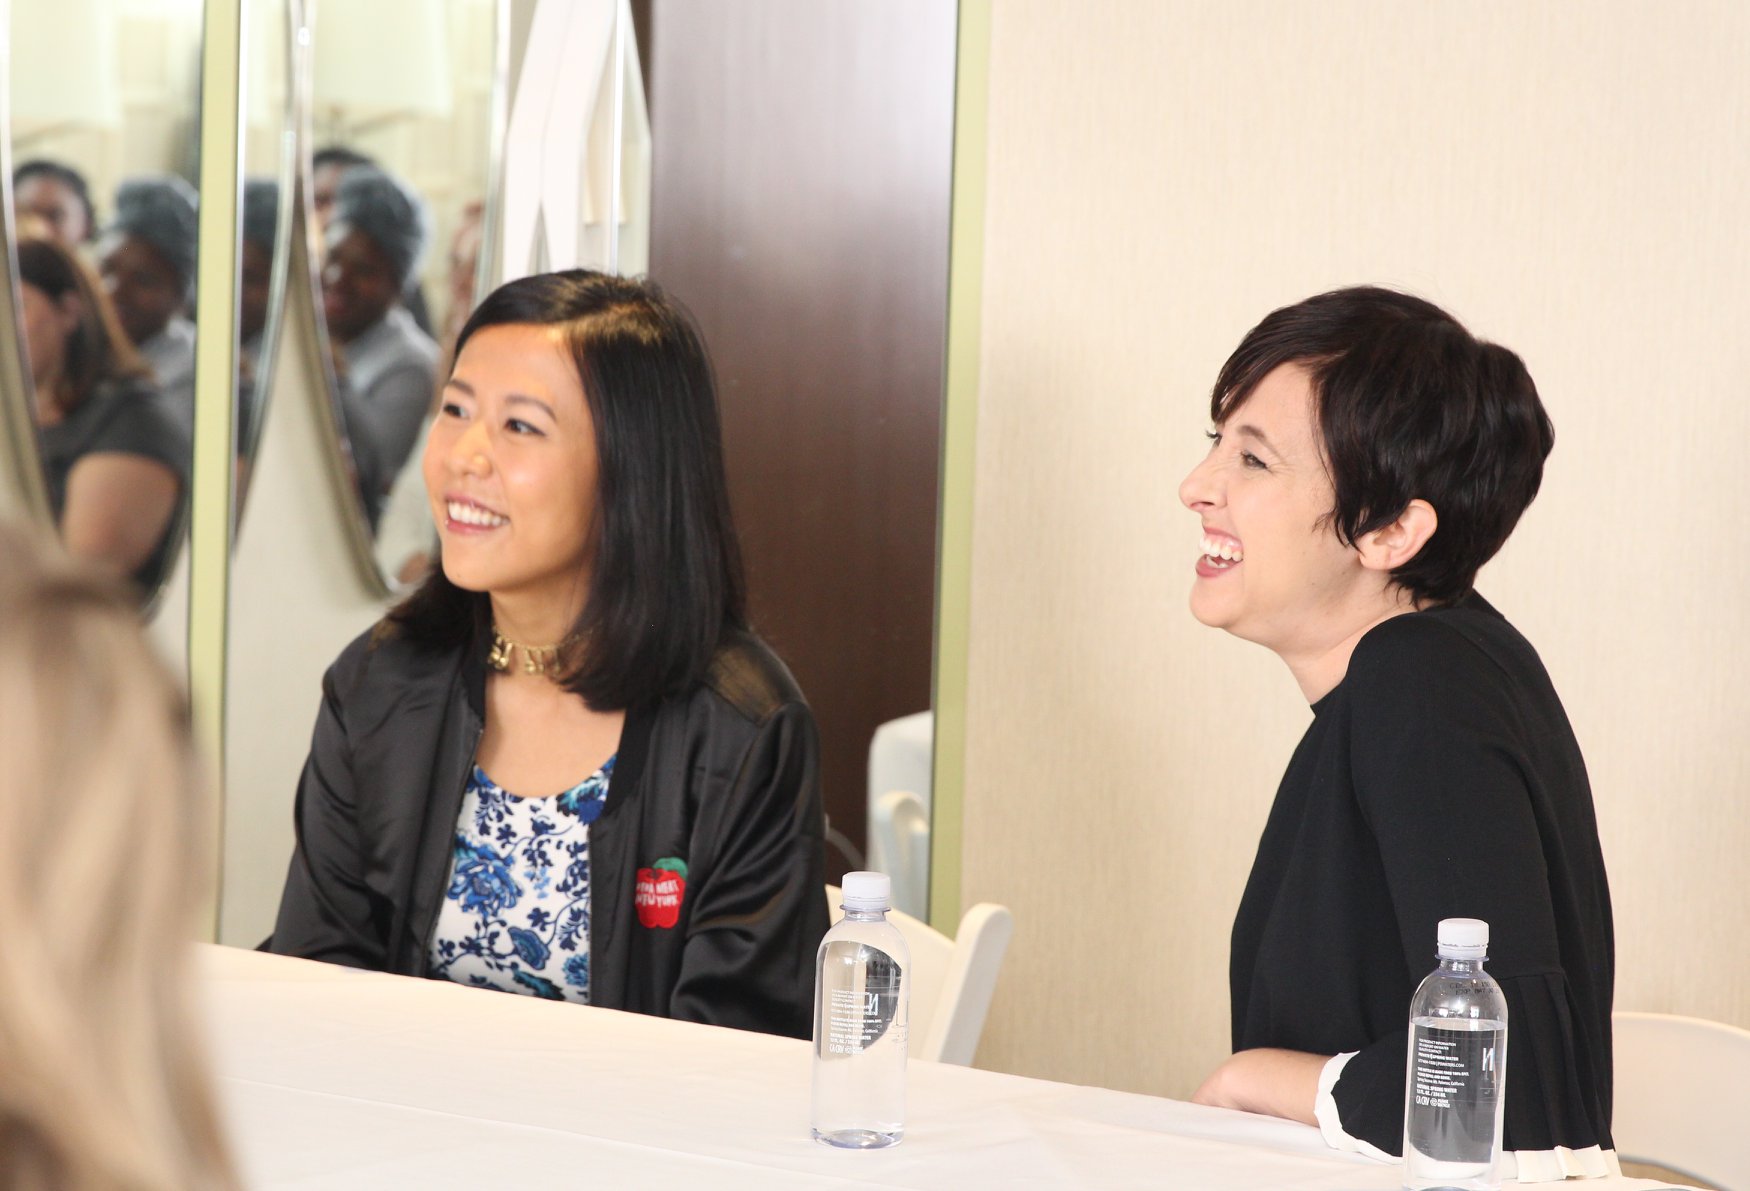 Interview with Pixar Short “Bao” Director Domee Shi and Producer Becky ...